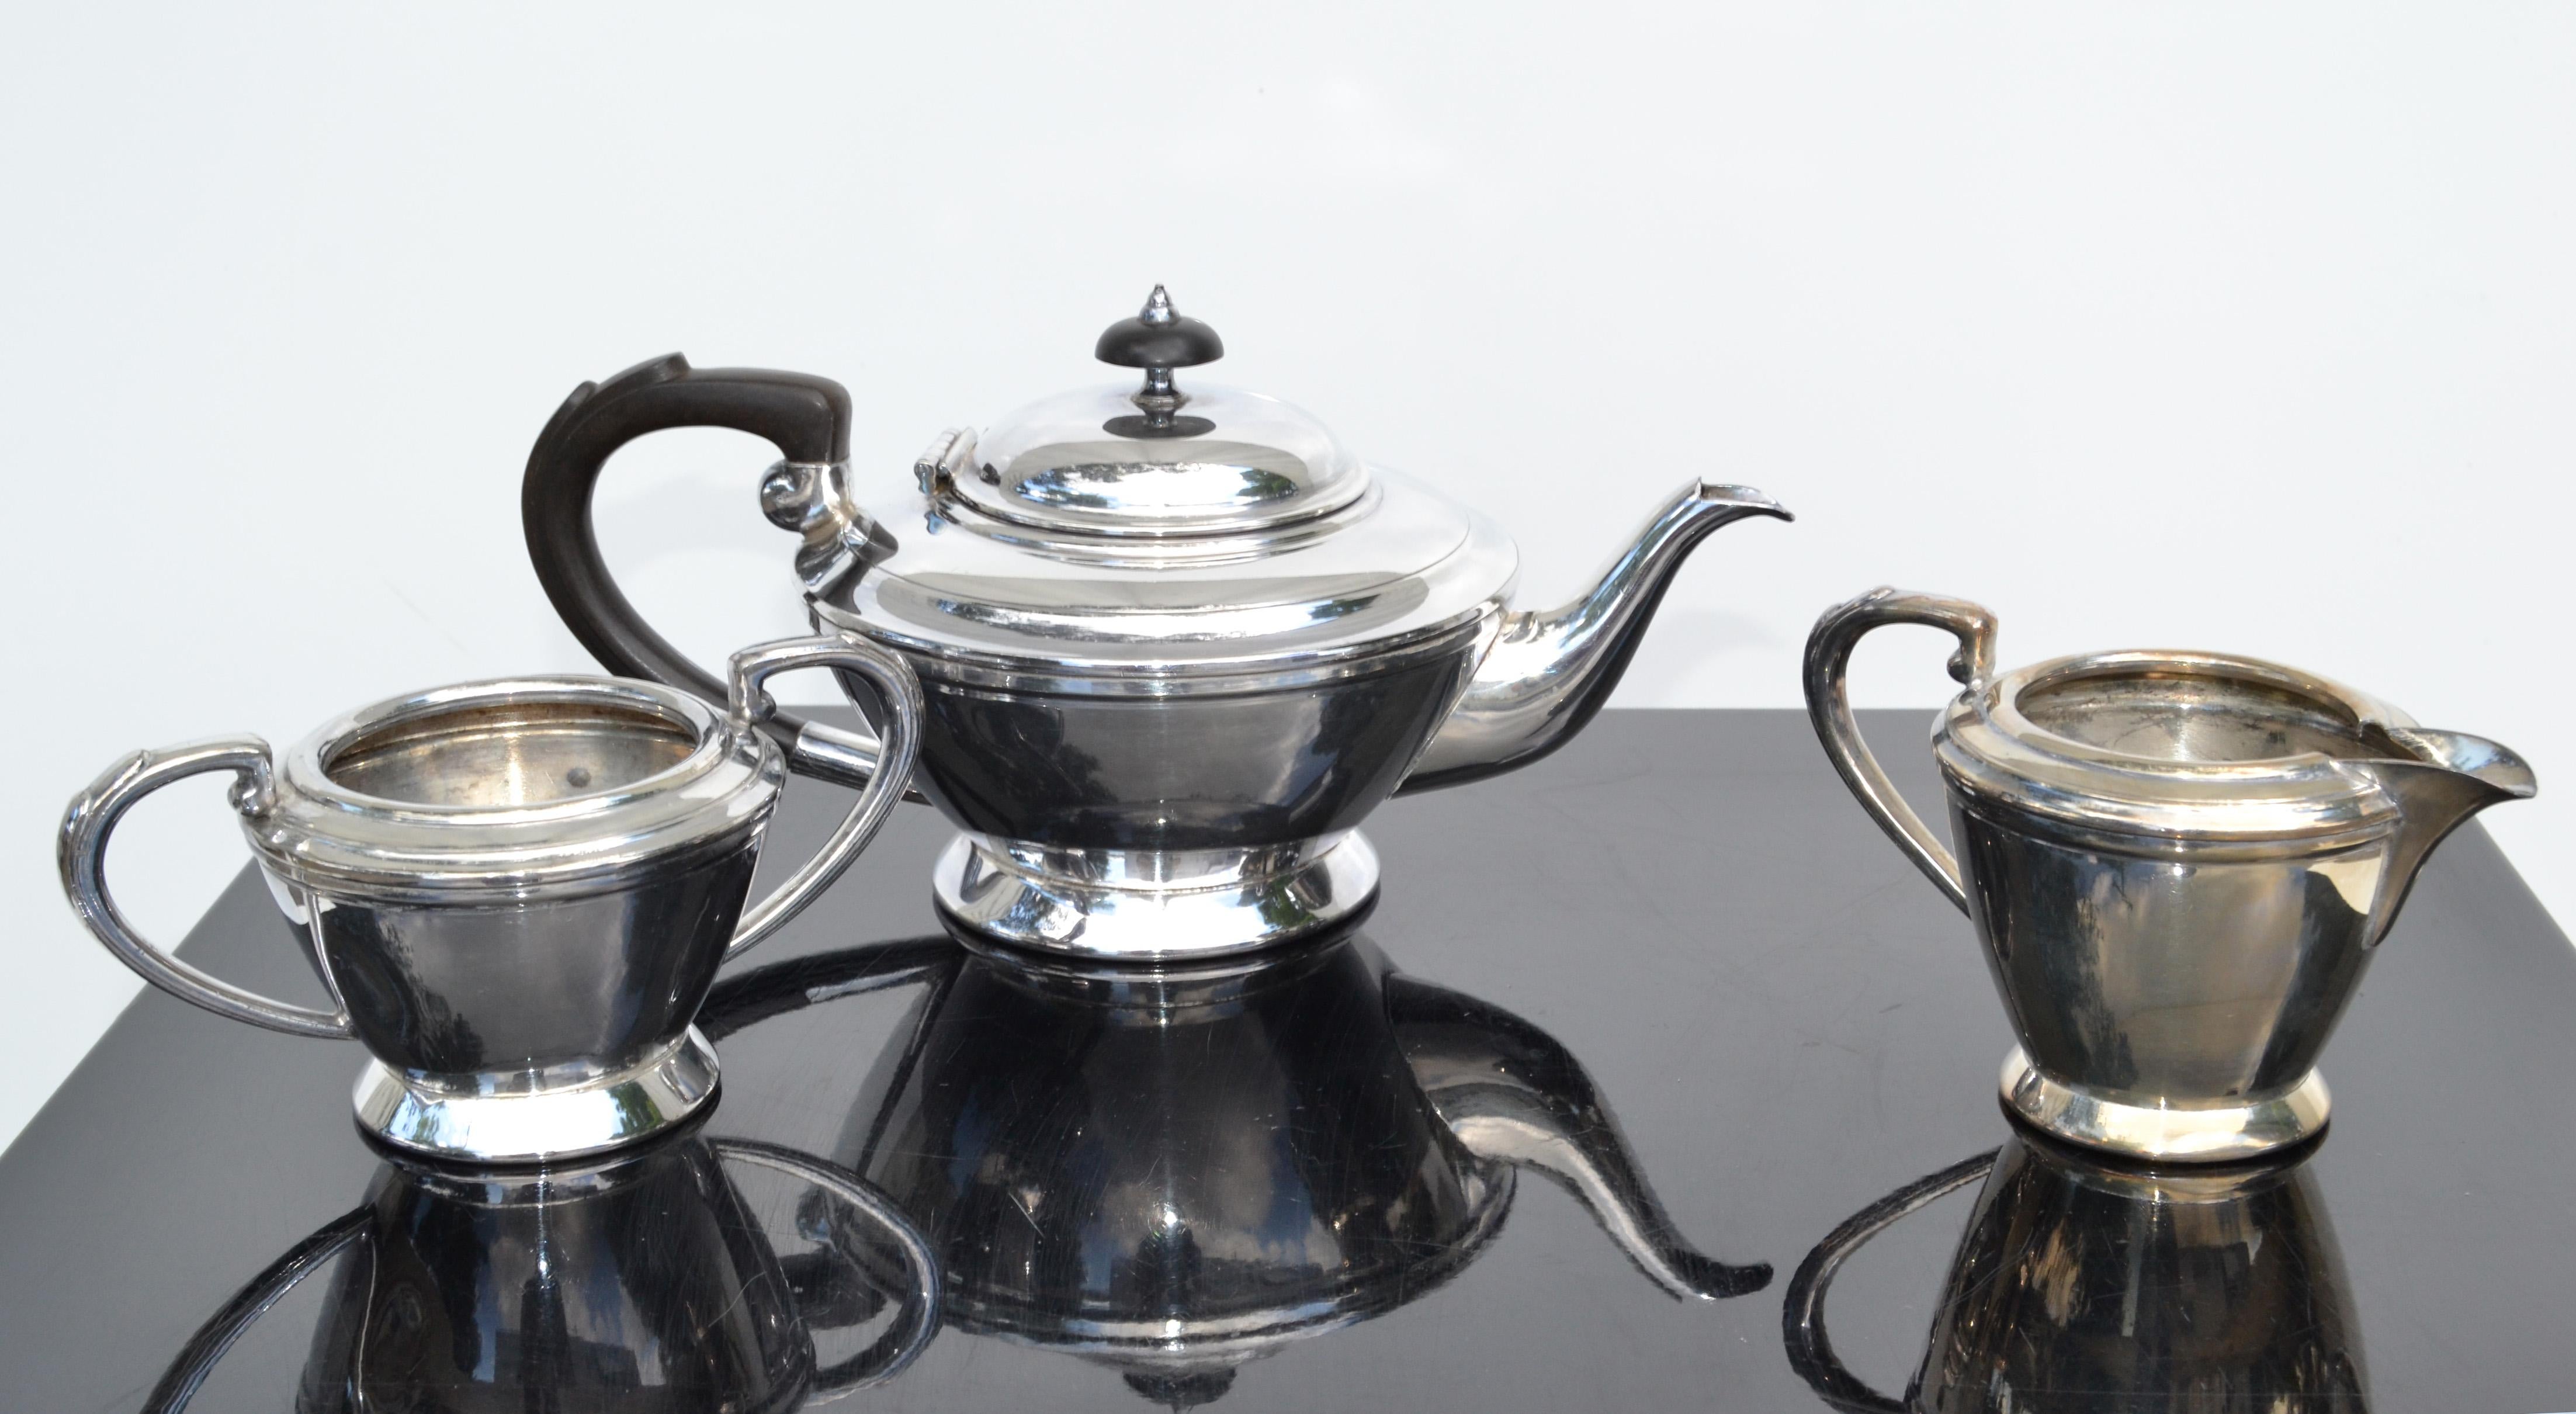 Circa 1930s, this silver service was made in England. All piece are signed with hallmarks. Features George I Style detailing. 
Bakelite Top and Handle to the Tea Pot. All pieces are marked and numbered.
Stamped:
EPBM #8181 Made in England